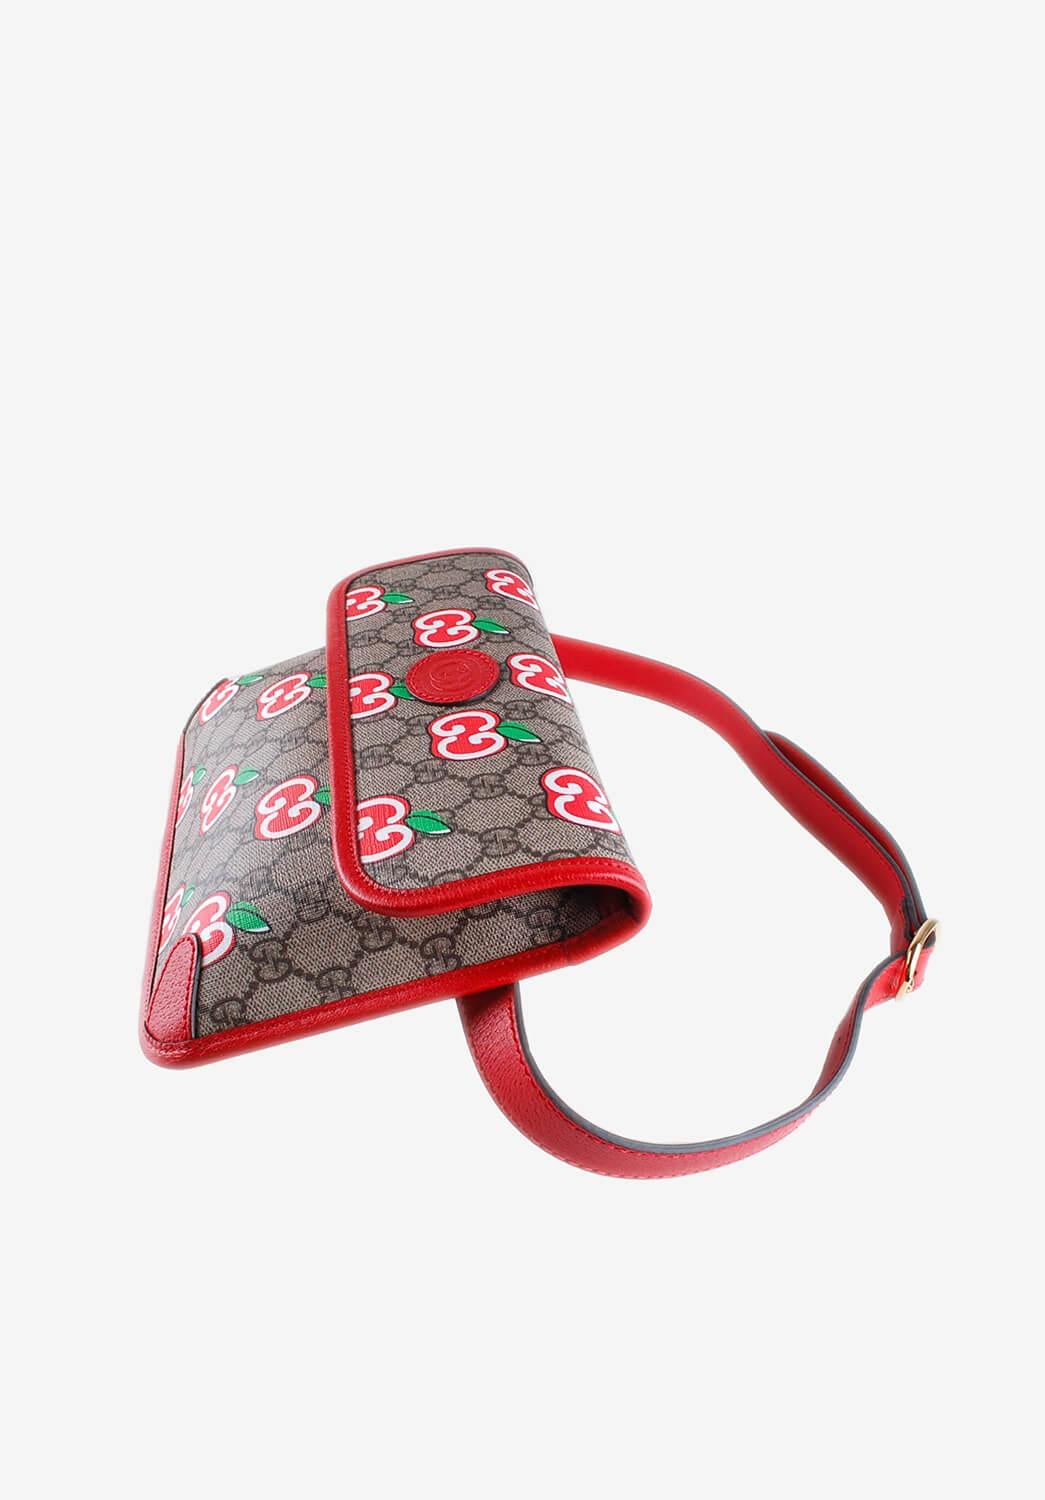 Women's  New Gucci GG Supreme Apple Print Women Waist Bag Leather Details S044 For Sale